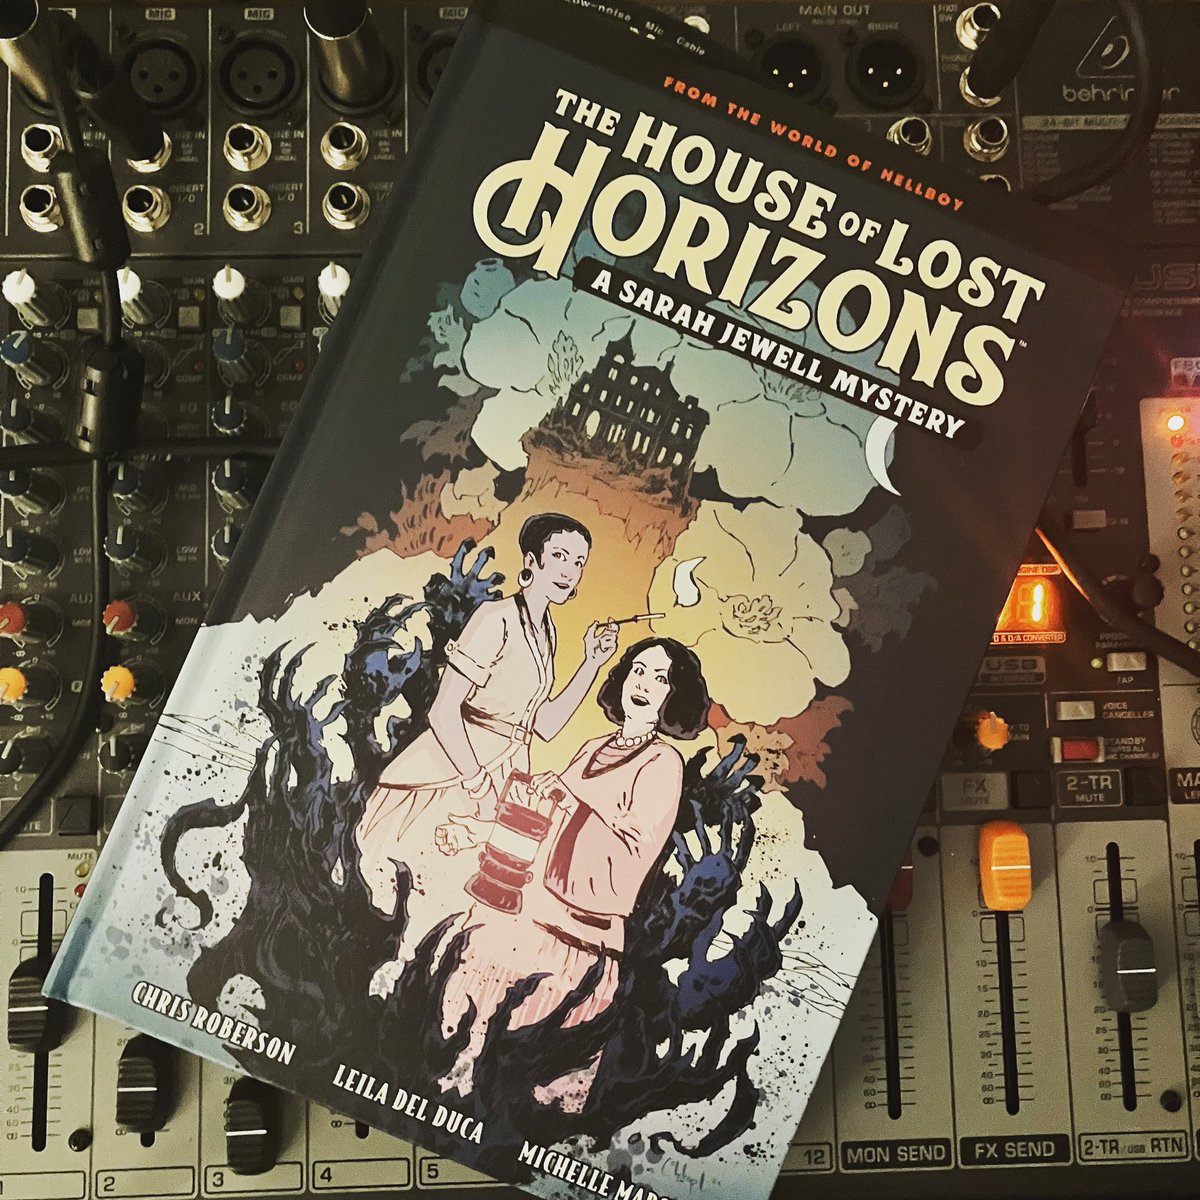 New Episode Today! 
podbean.com/ew/pb-njgbc-12… 
We discuss “The House of Lost Horizons: A Sarah Jewel Mystery,” on this week’s podcast! LINK IN BIO! #hellboybookclub #podcast #hellboy #mikemignola #leiladelduca #michellemadsen #christophermitten #clemrobins